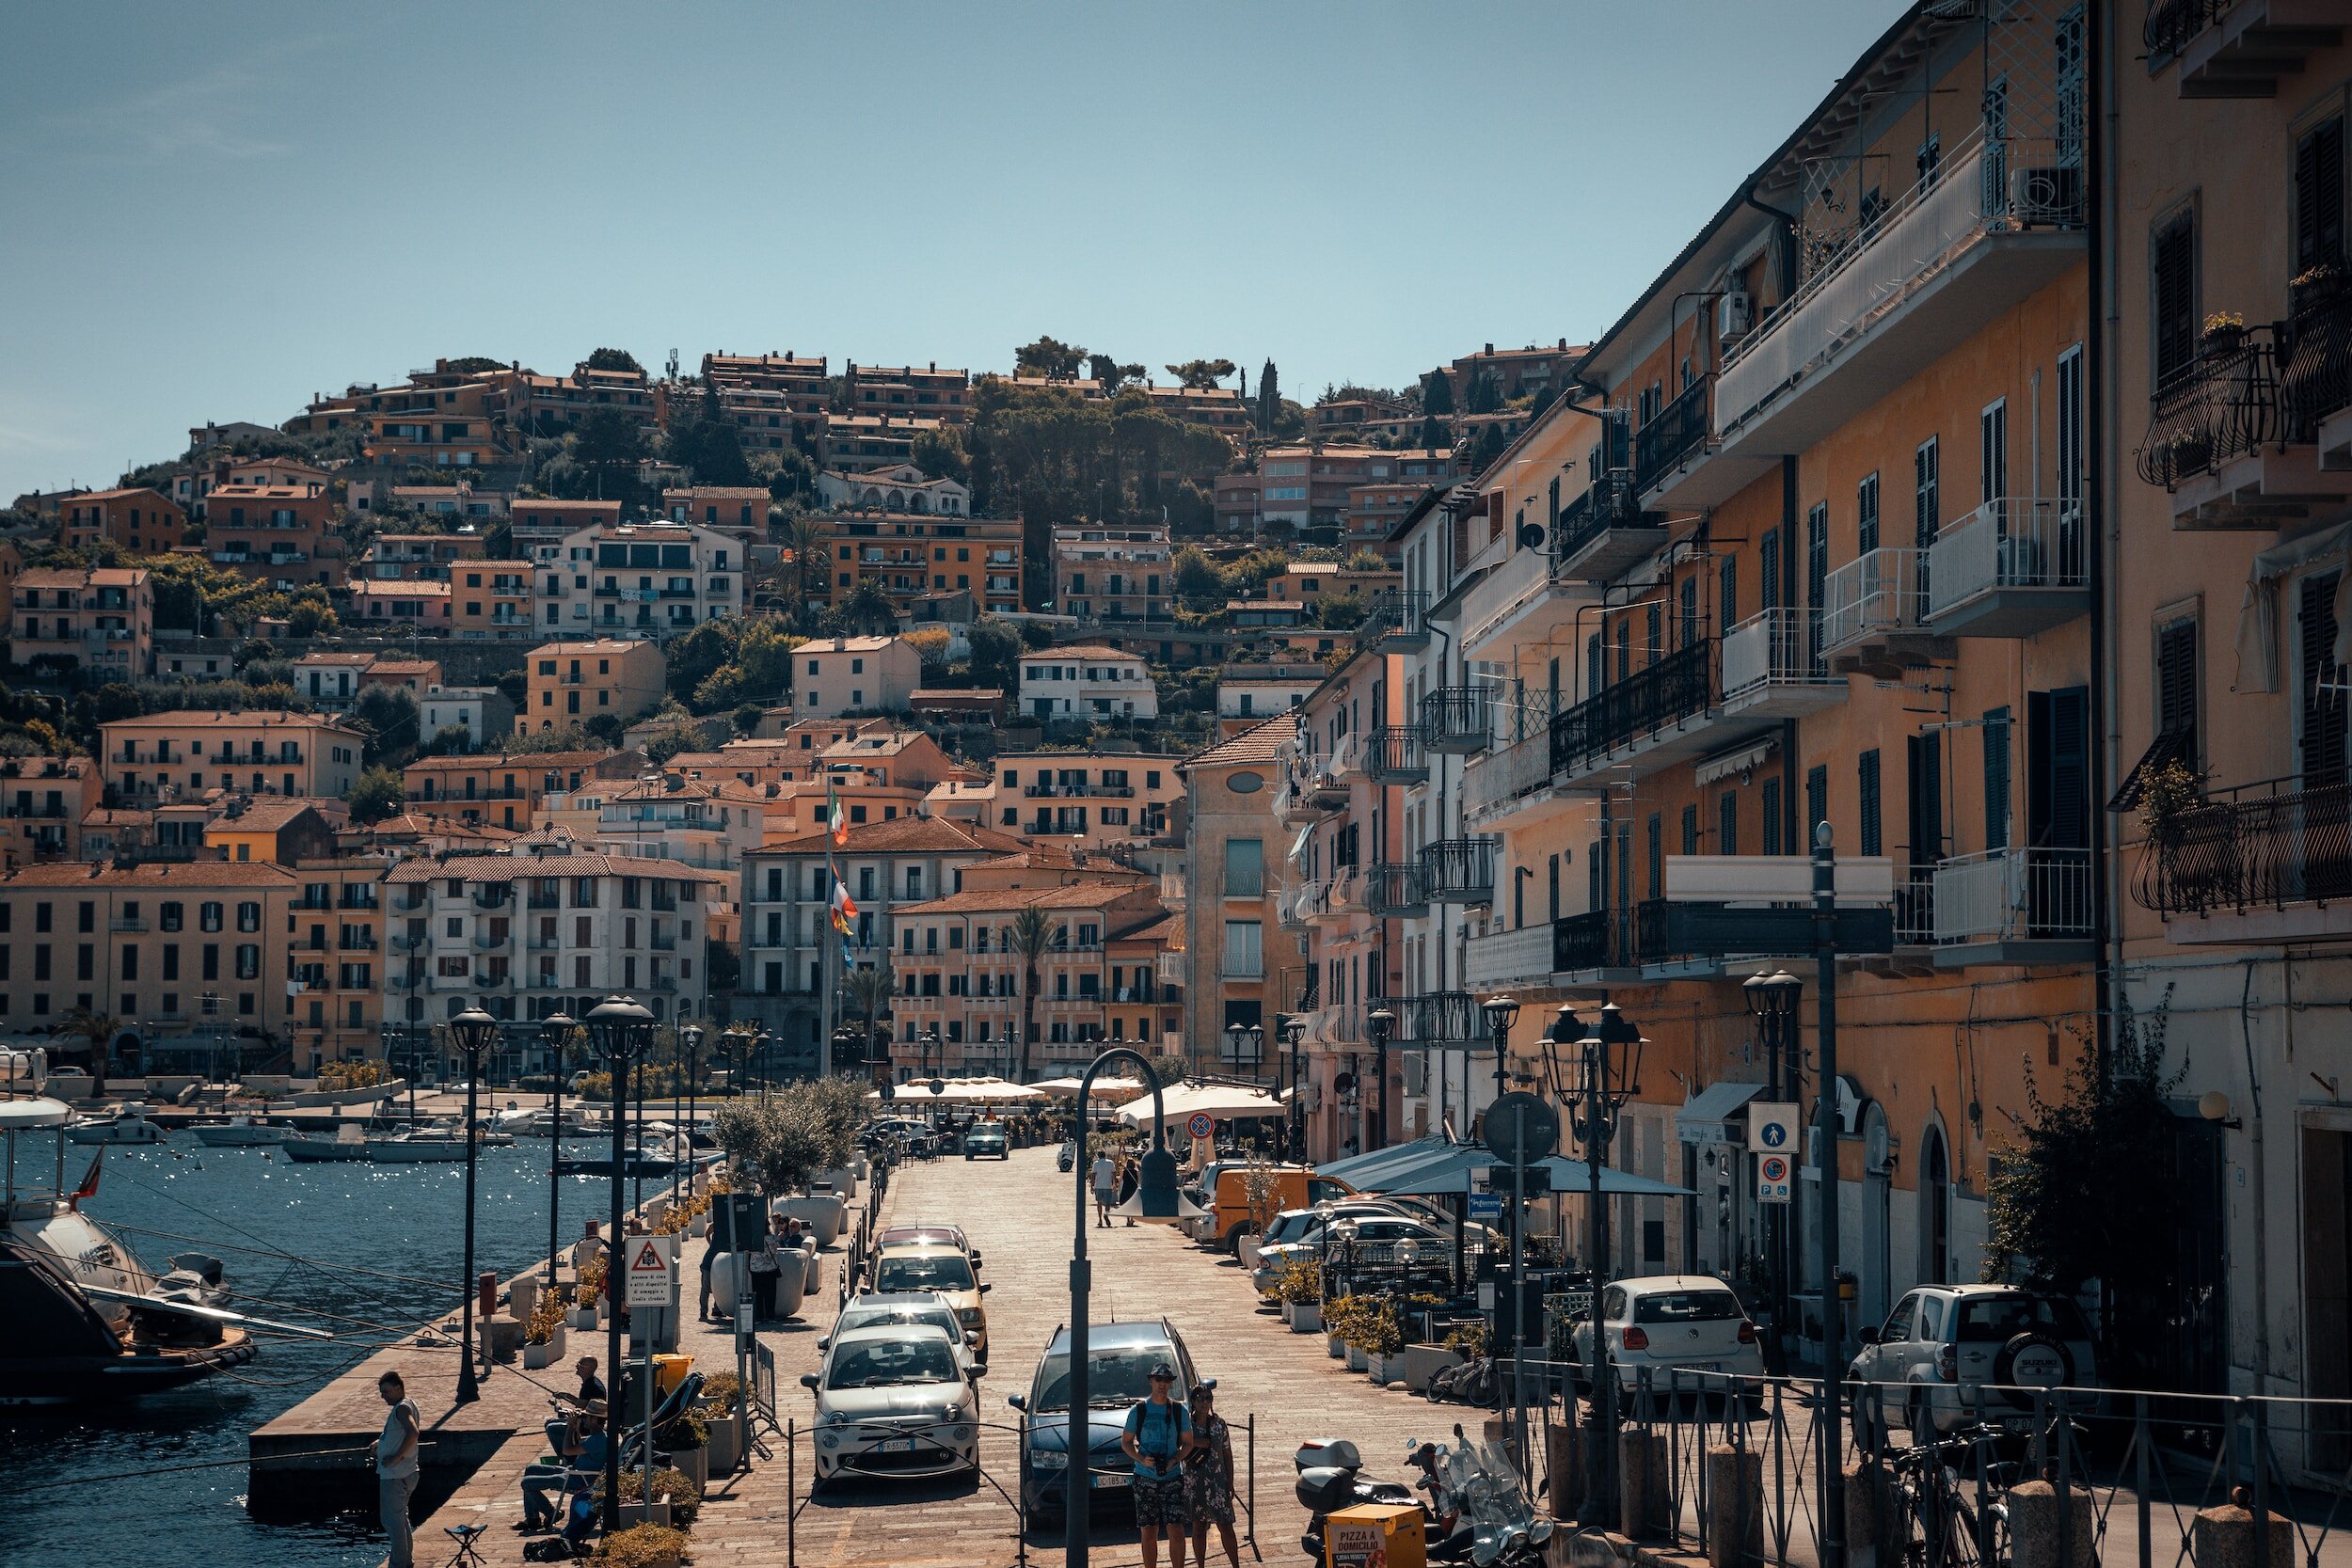 The waterfront of the town of Porto Santo Stefano, with buildings running along the main street on the right, and the sea on the left